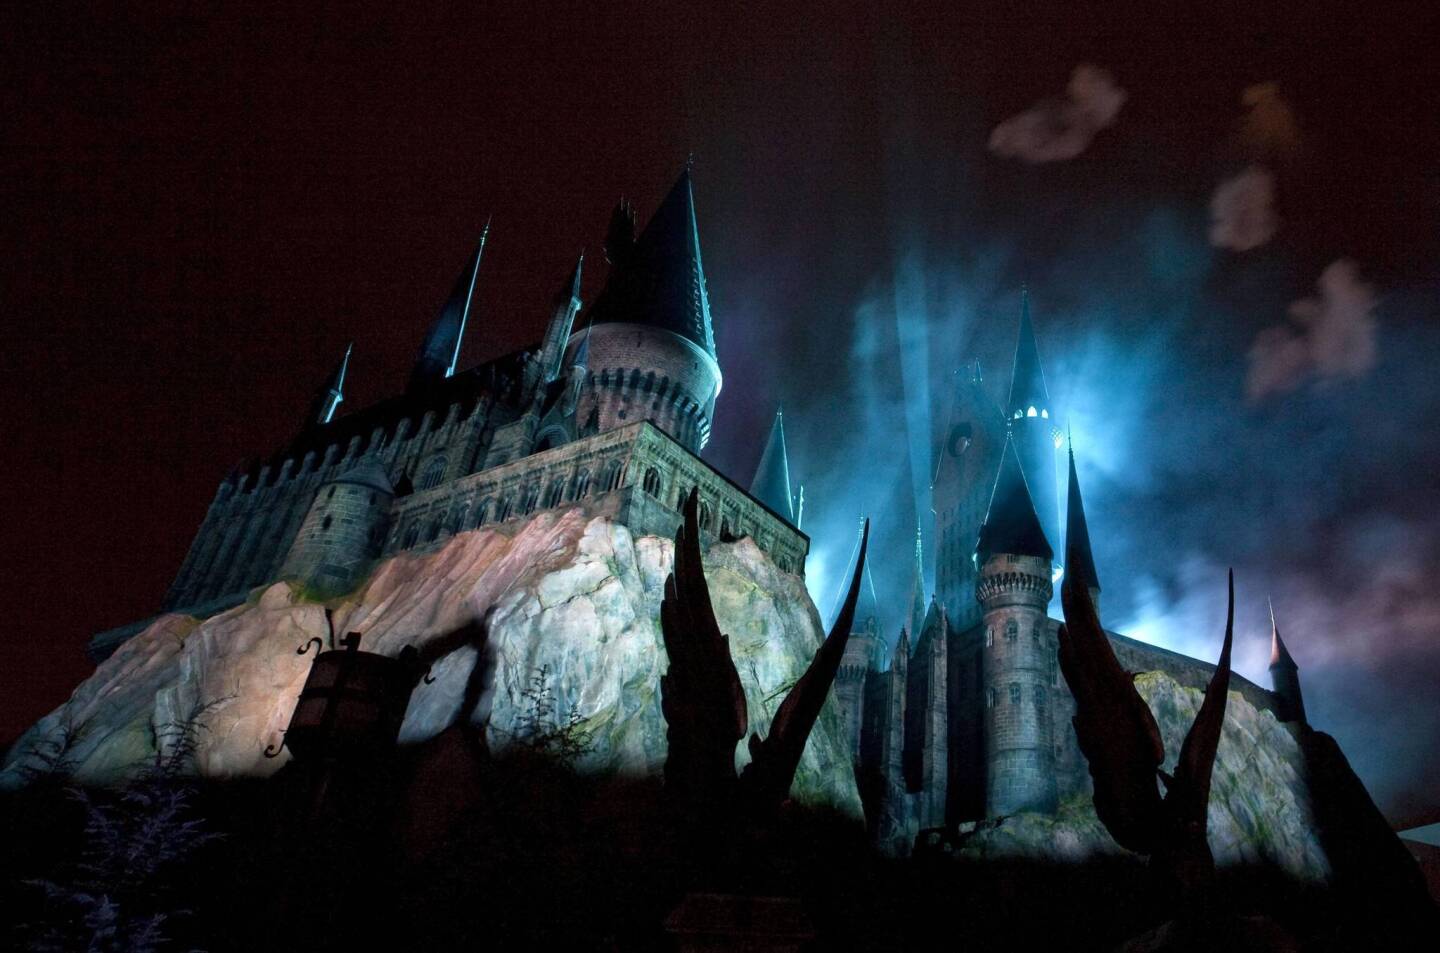 Smoke filters through Hogwarts Castle during the grand opening celebration for The Wizarding World of Harry Potter in Orlando